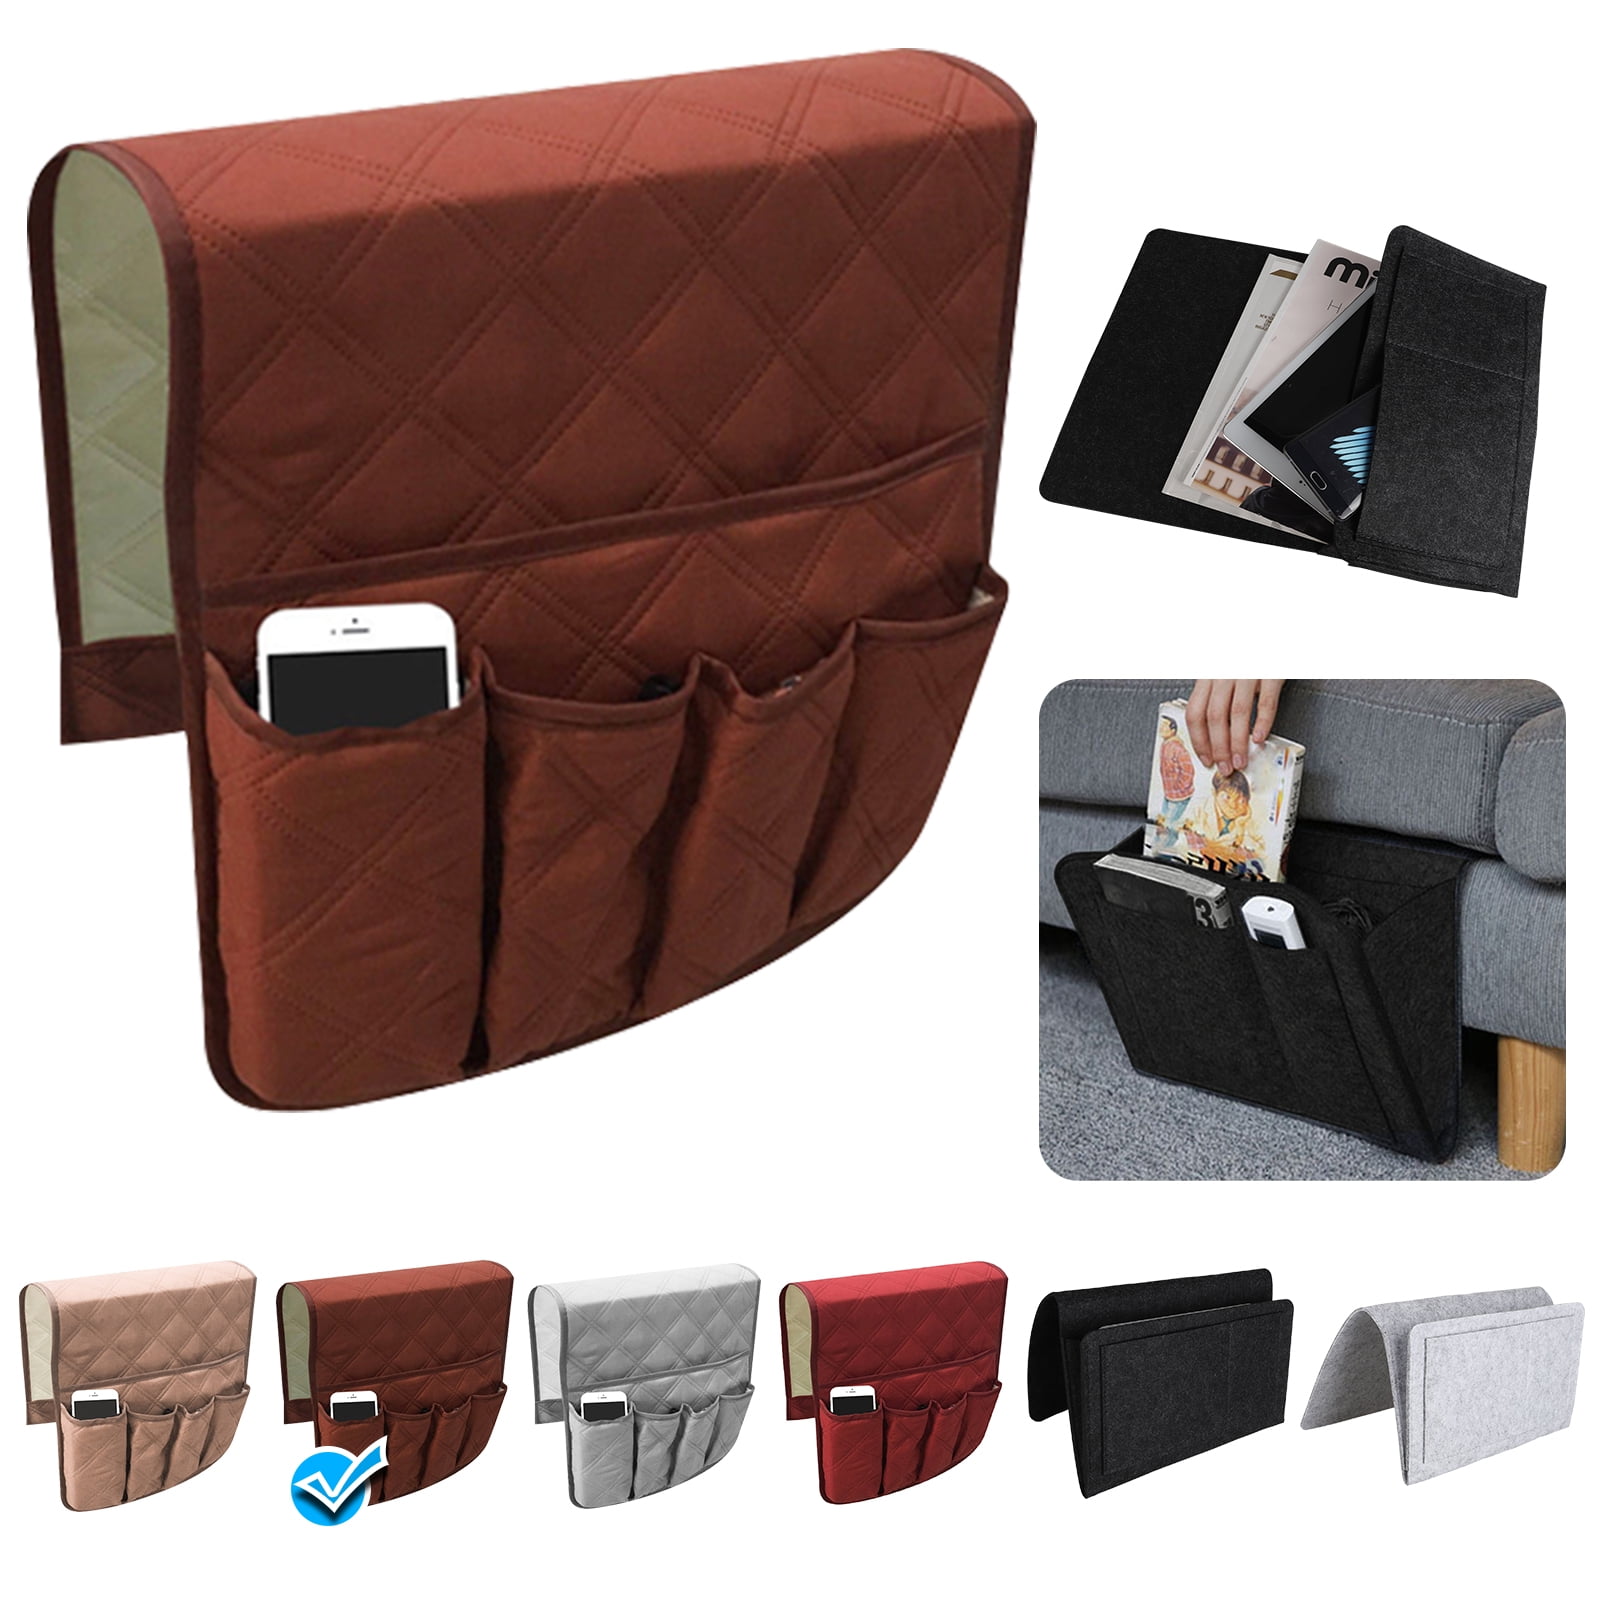 Brown Armrest Covers with 5 Pockets for Sofa Couch Armchair Remote Control Holder for Cellphone Magazines Glasses TV Remote Control DXIA Anti-Slip Sofa Armrest Organizer Space Saver Bag 